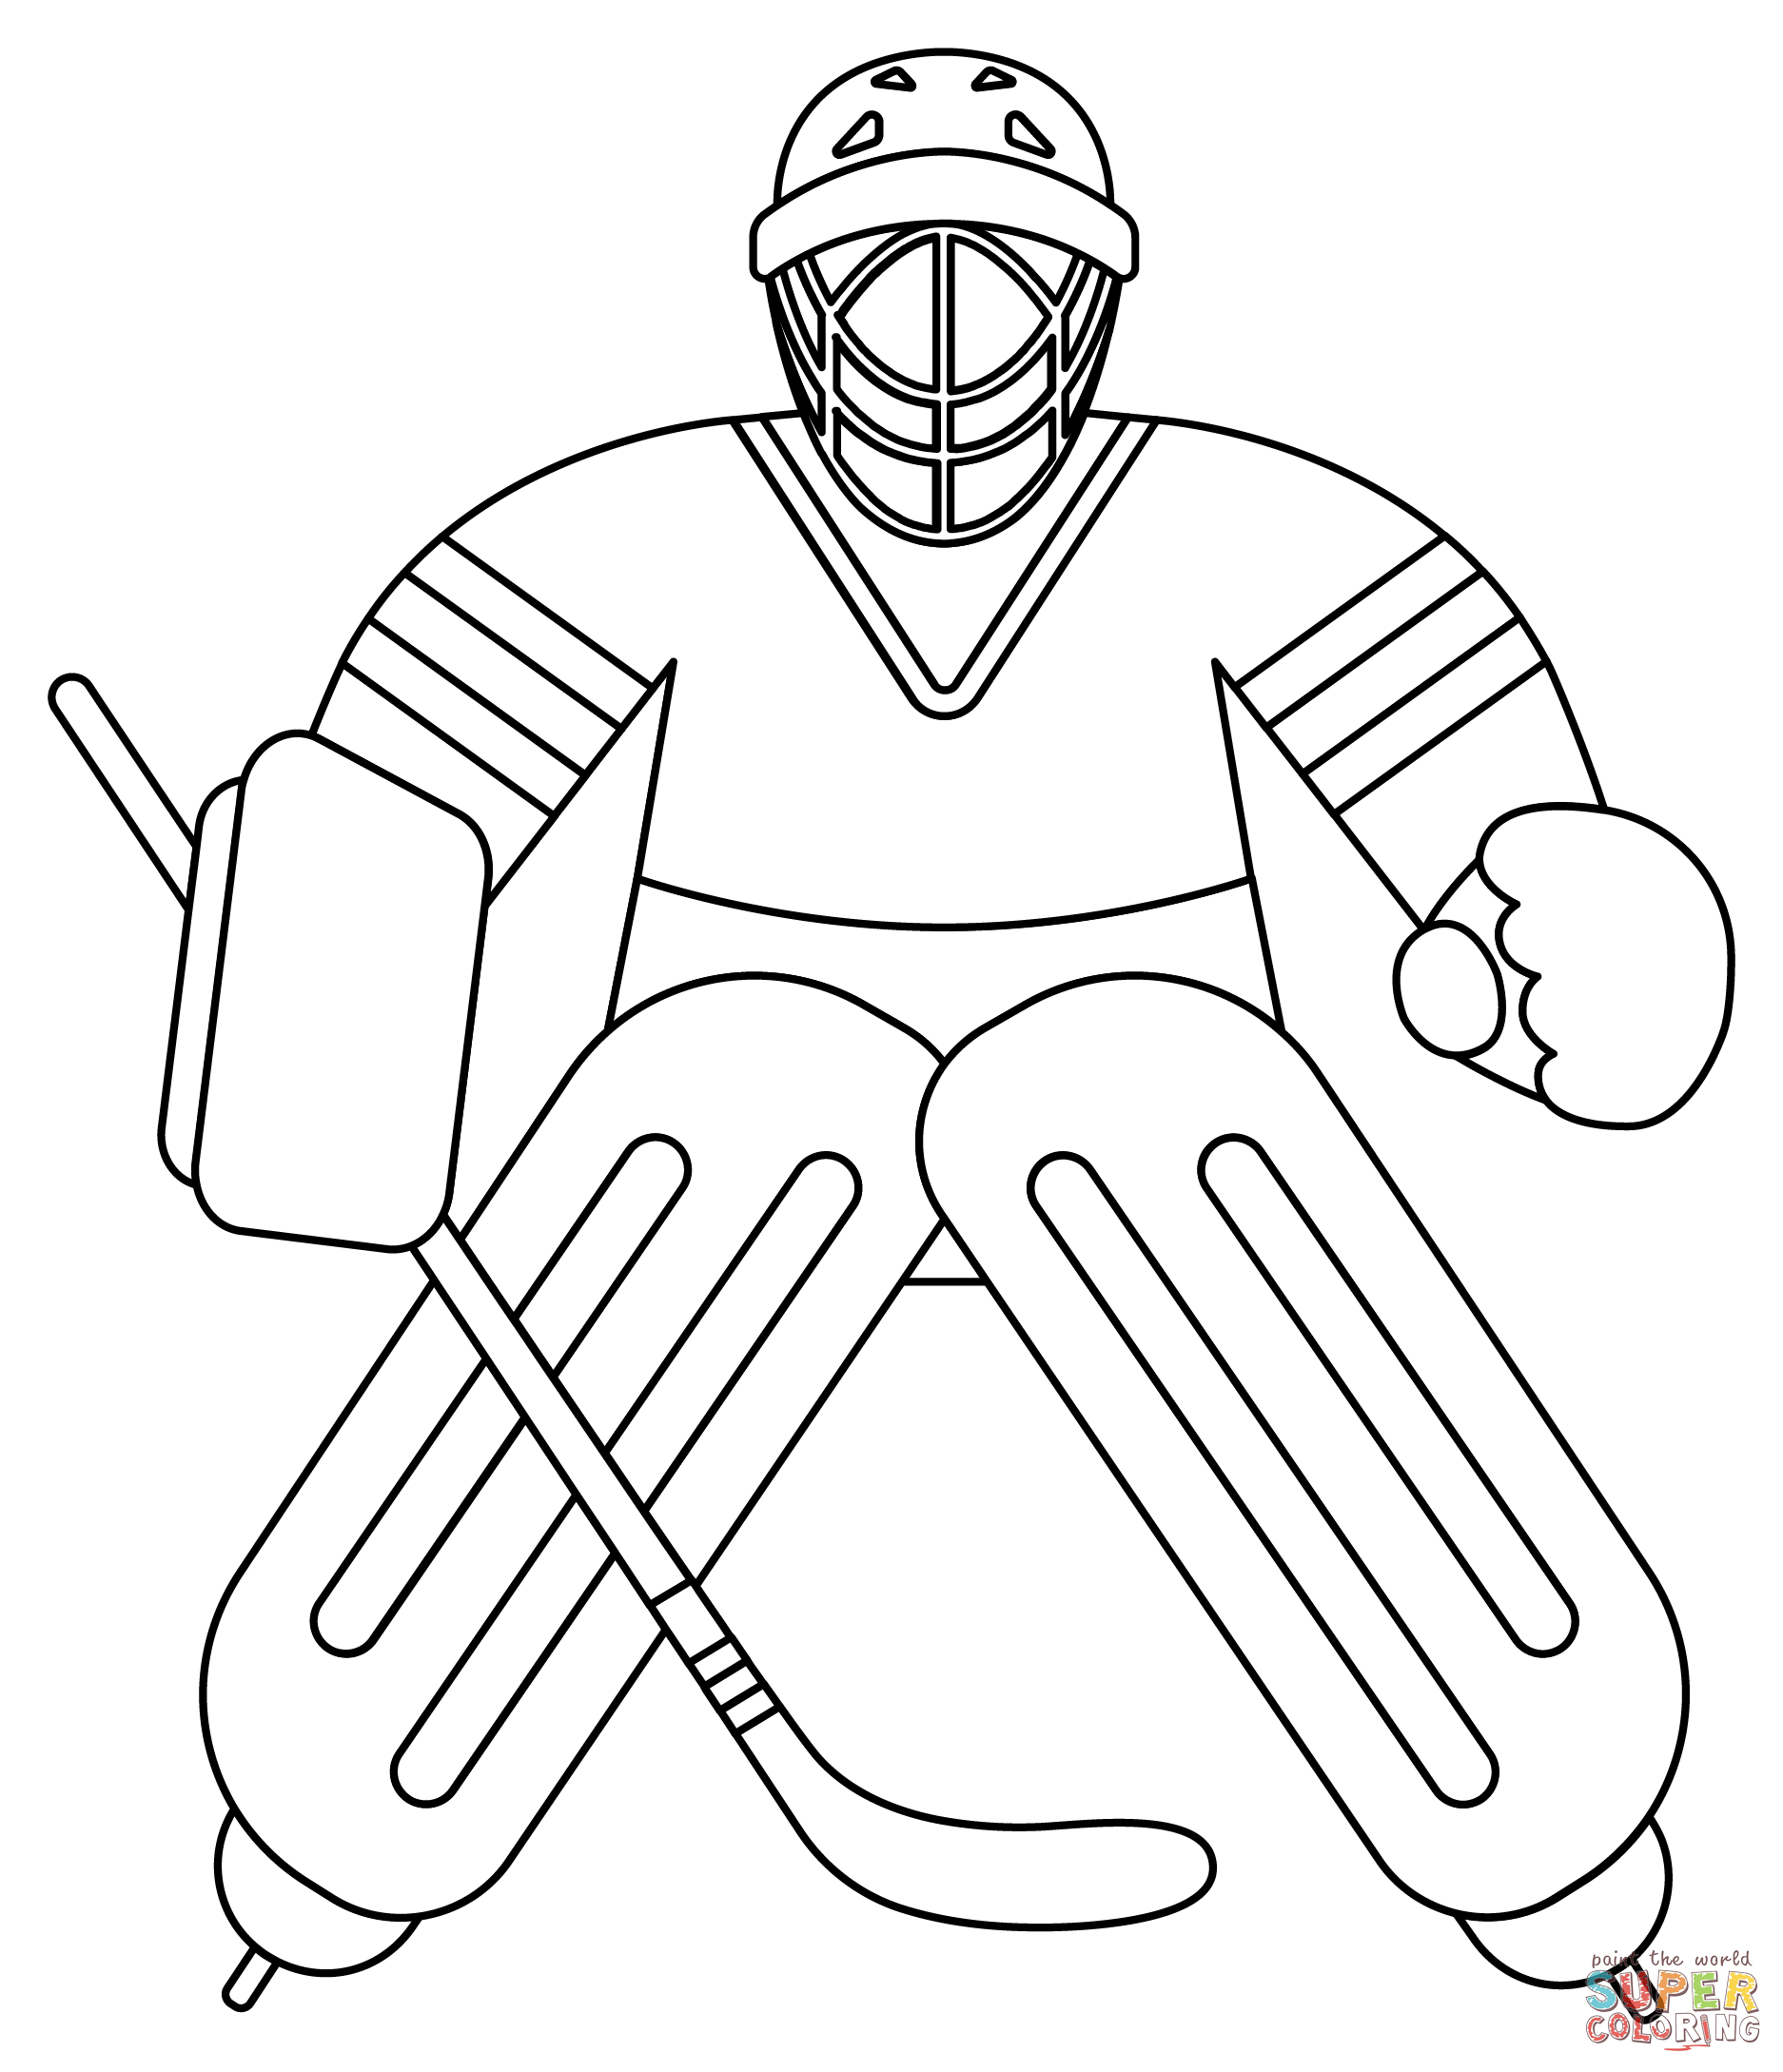 Hockey goalie coloring page free printable coloring pages